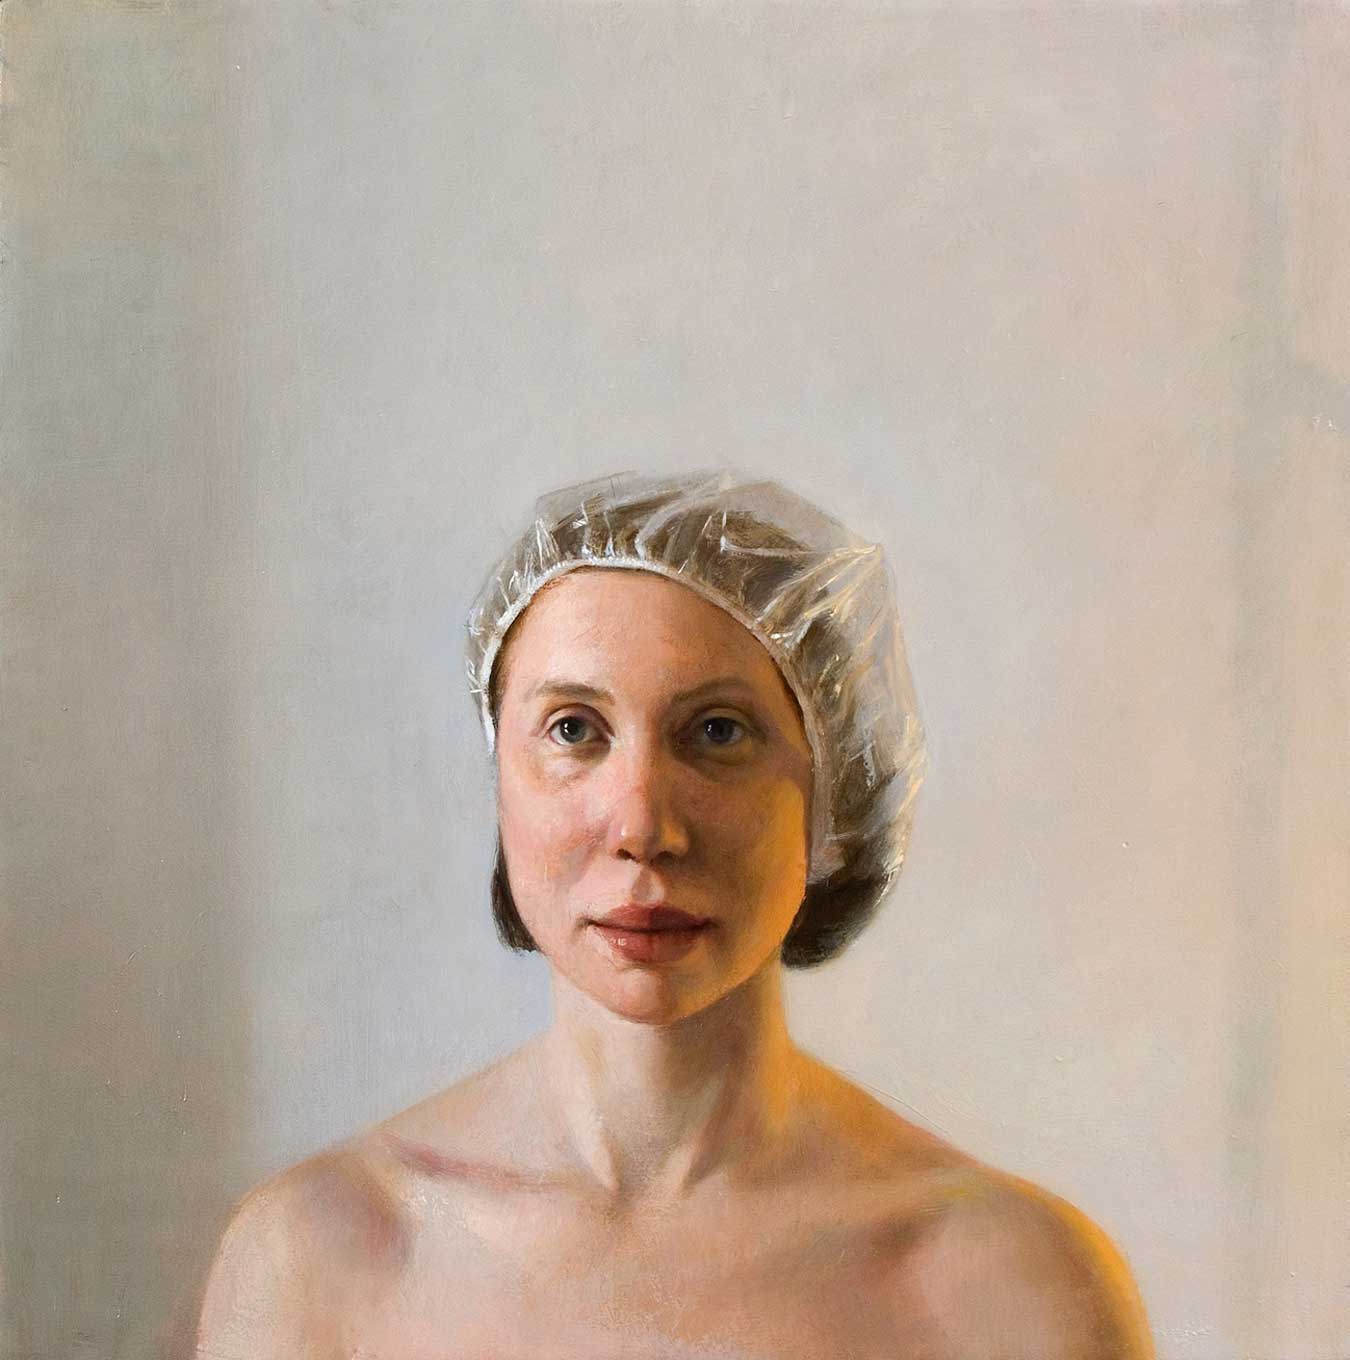 Emil Robinson, Showered, 2007, oil on panel, 24 x 24 inches (courtesy of the artist)